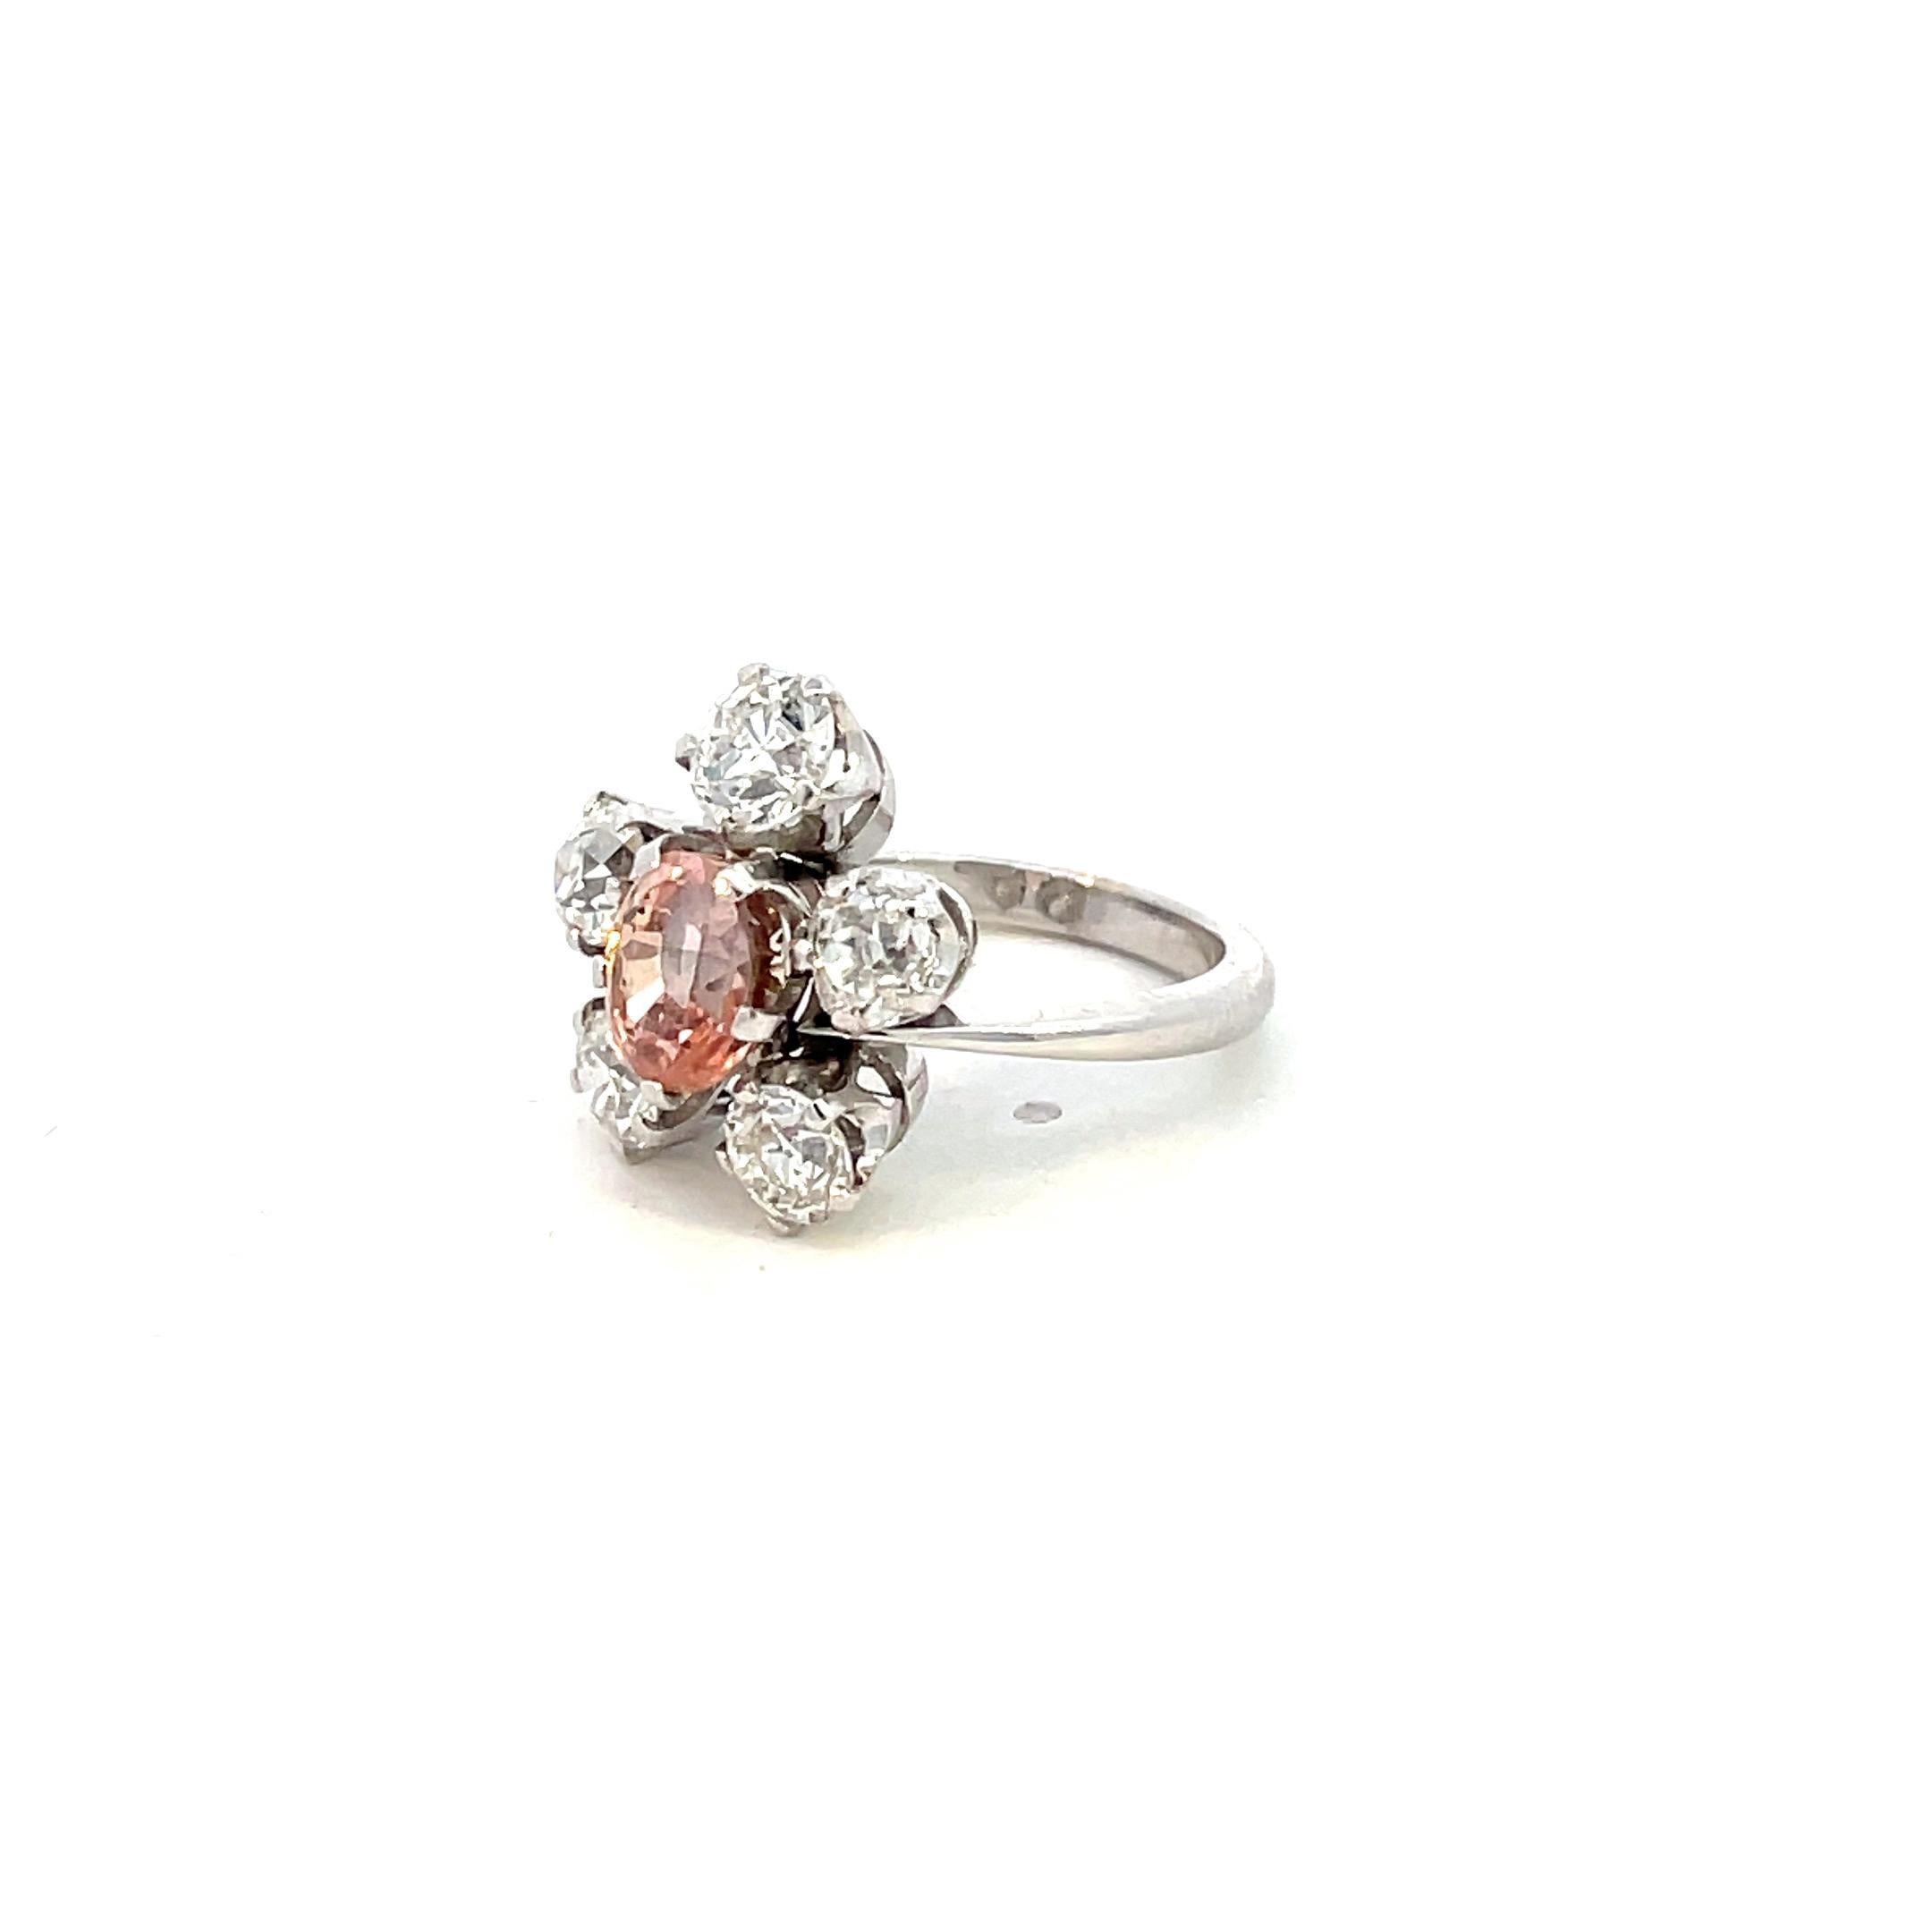 Victorian Grs 2.07 carat No Heat Orangy Pink Padparadscha Sapphire and diamonds Ring